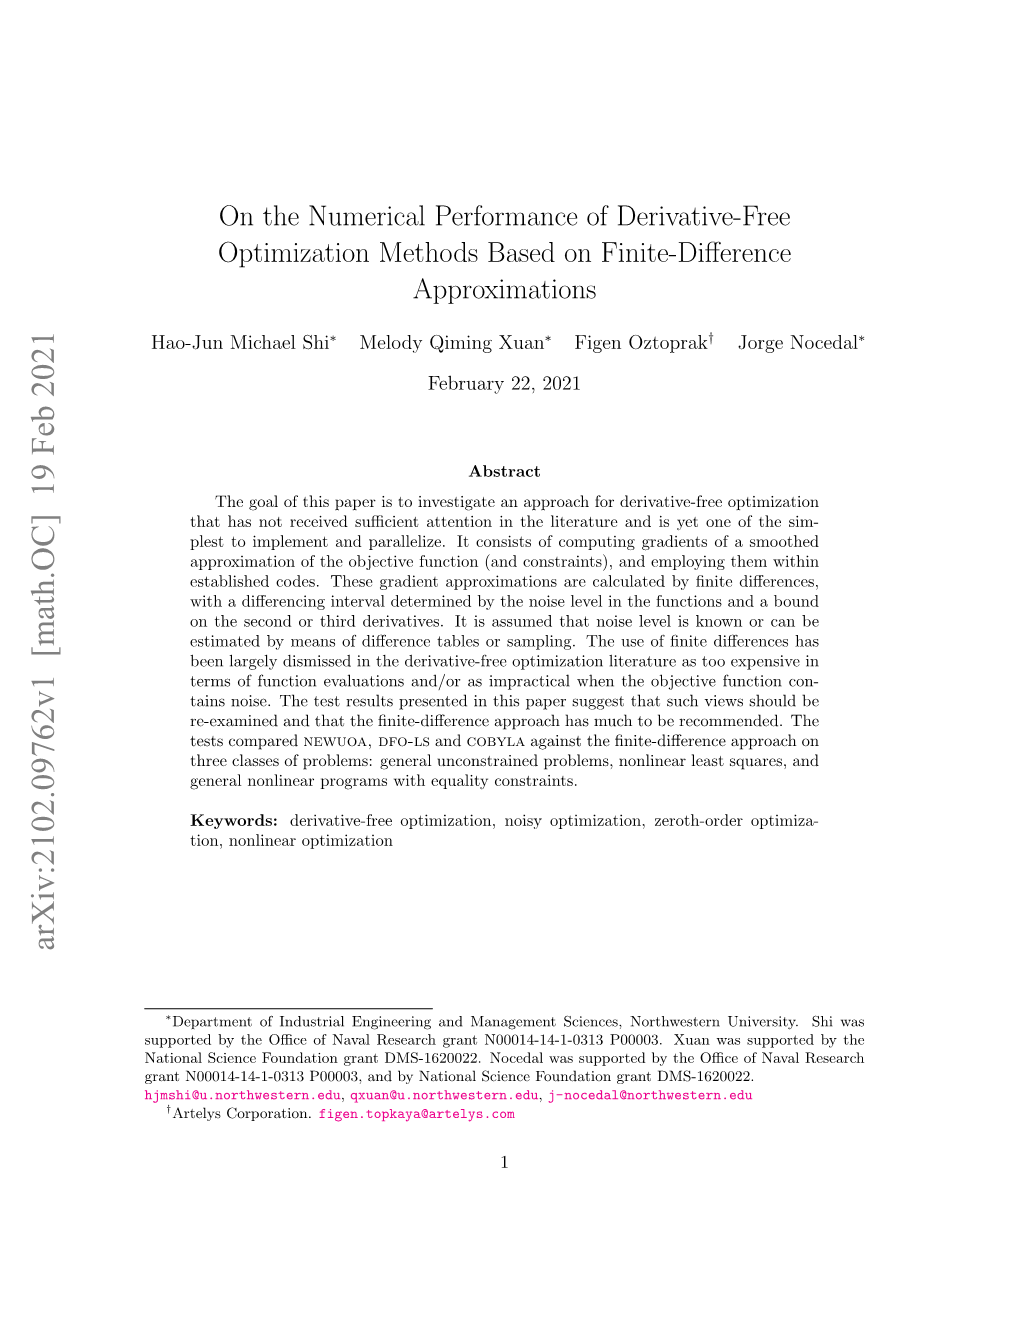 On the Numerical Performance of Derivative-Free Optimization Methods Based on Finite-Diﬀerence Approximations